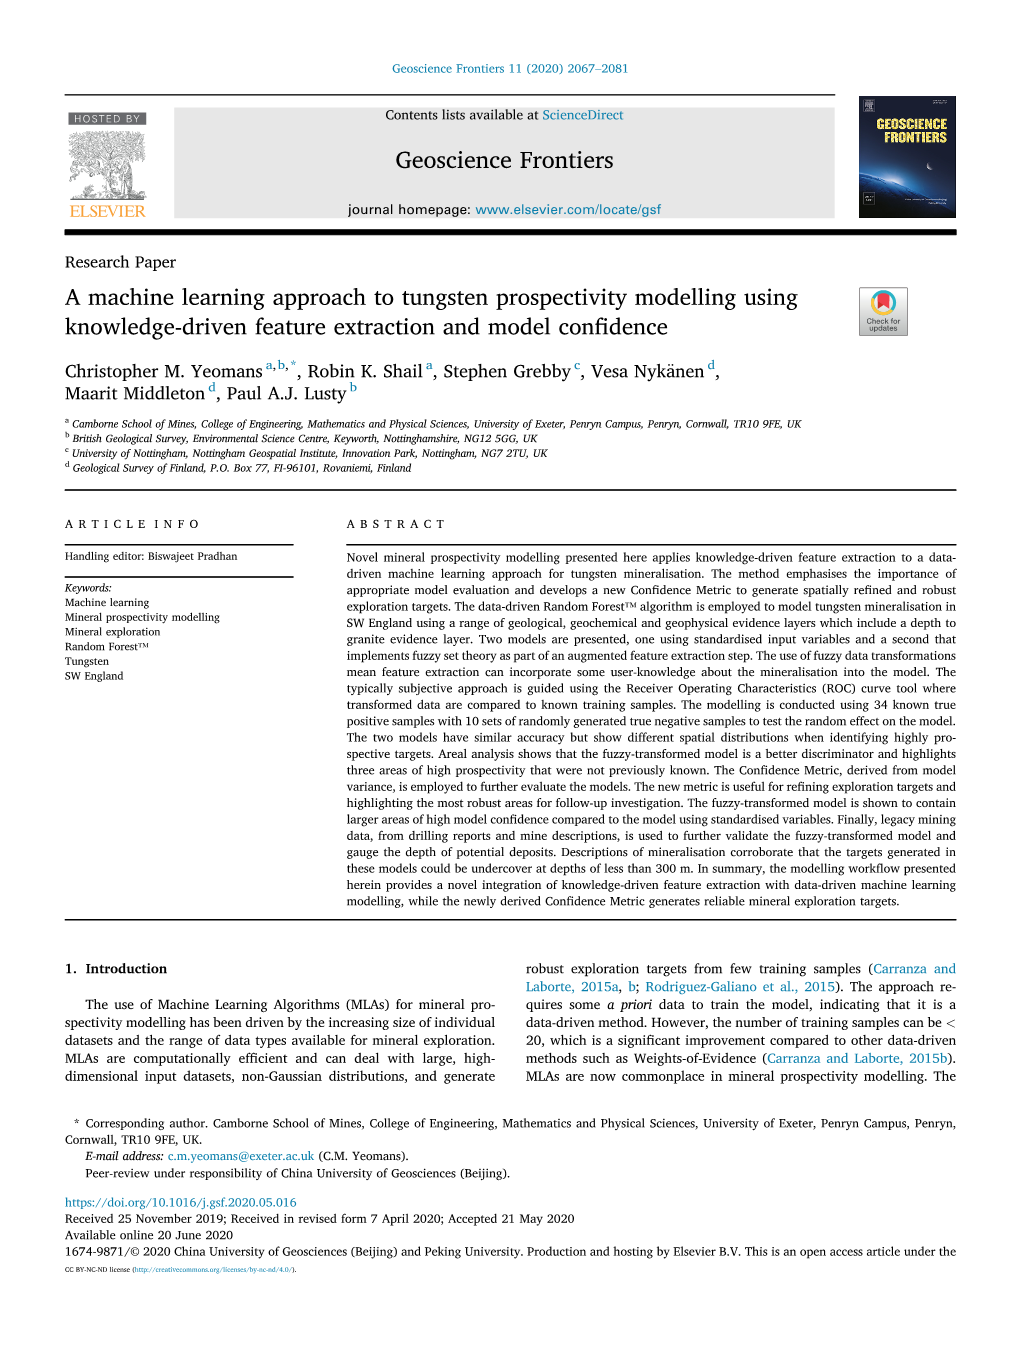 A Machine Learning Approach to Tungsten Prospectivity Modelling Using Knowledge-Driven Feature Extraction and Model Confidence